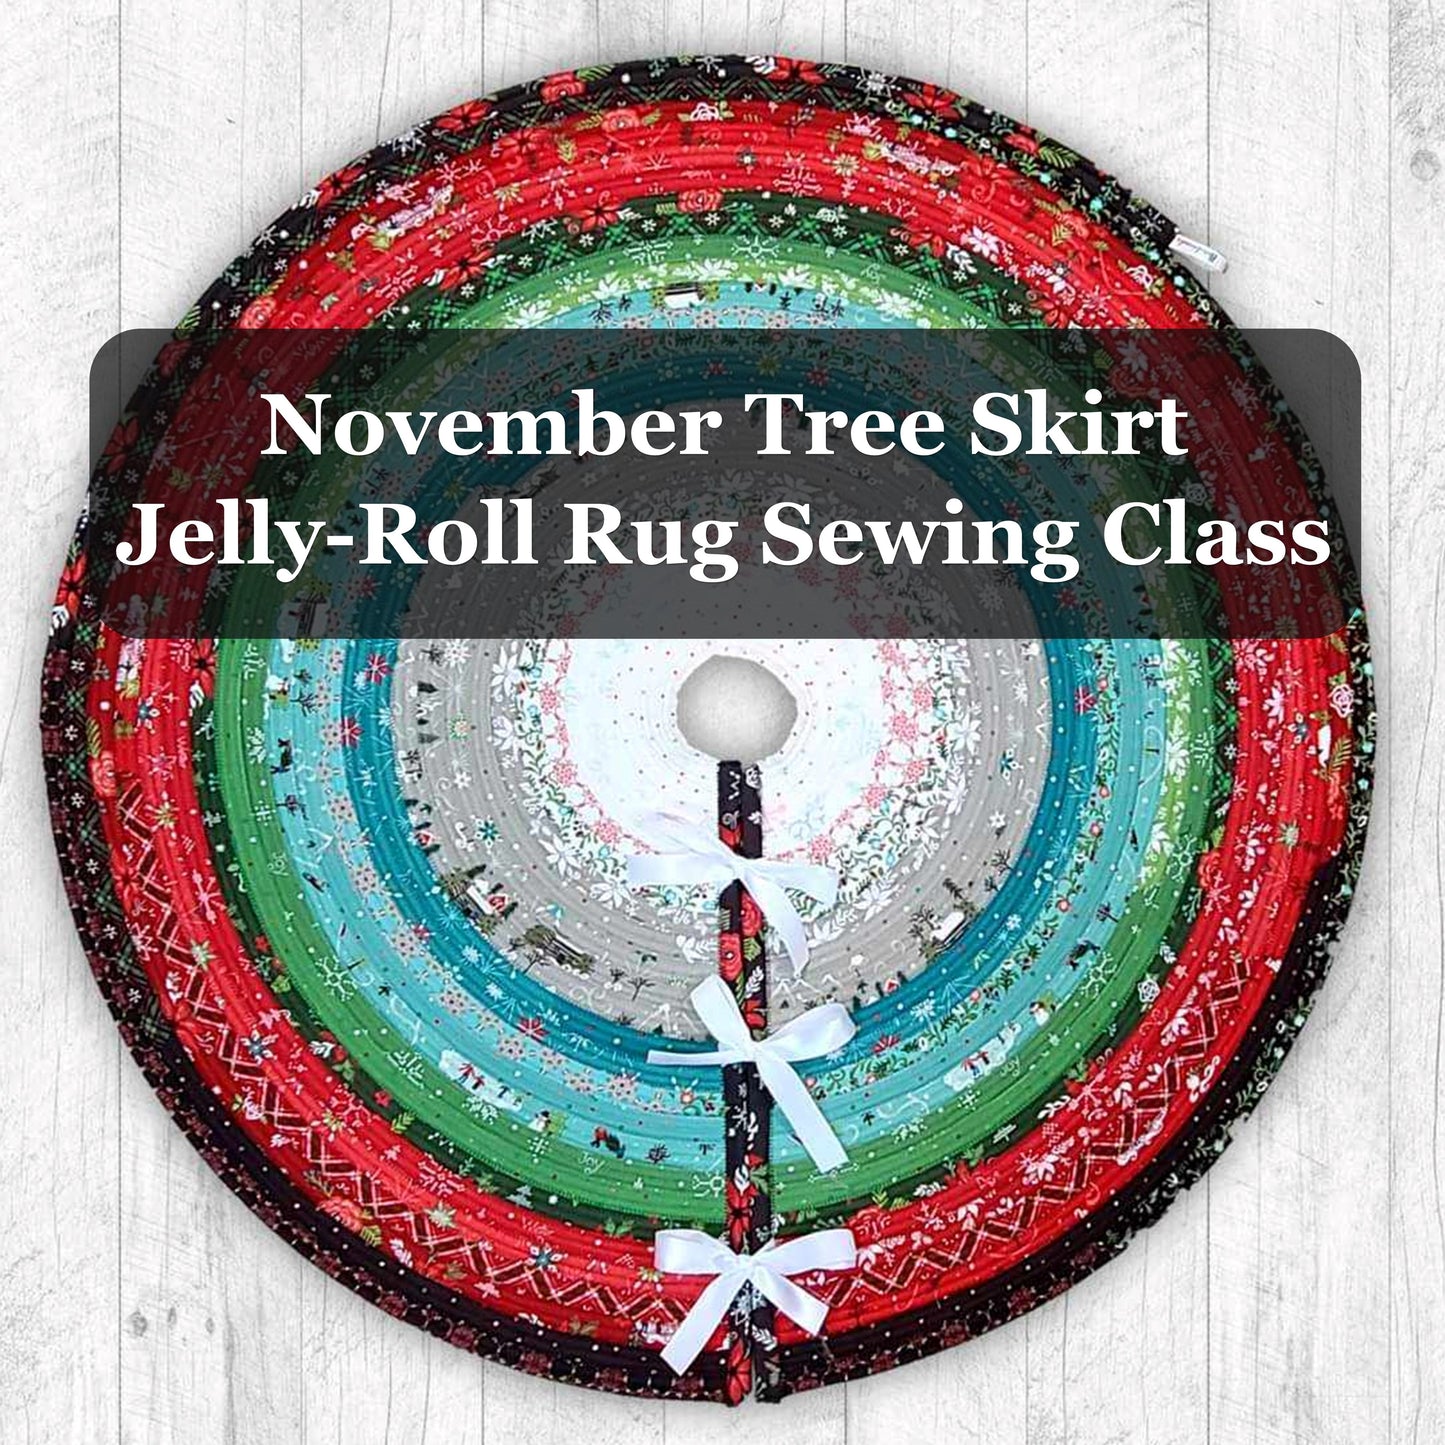 November Tree Skirt Jelly-Roll Rug Sewing Class